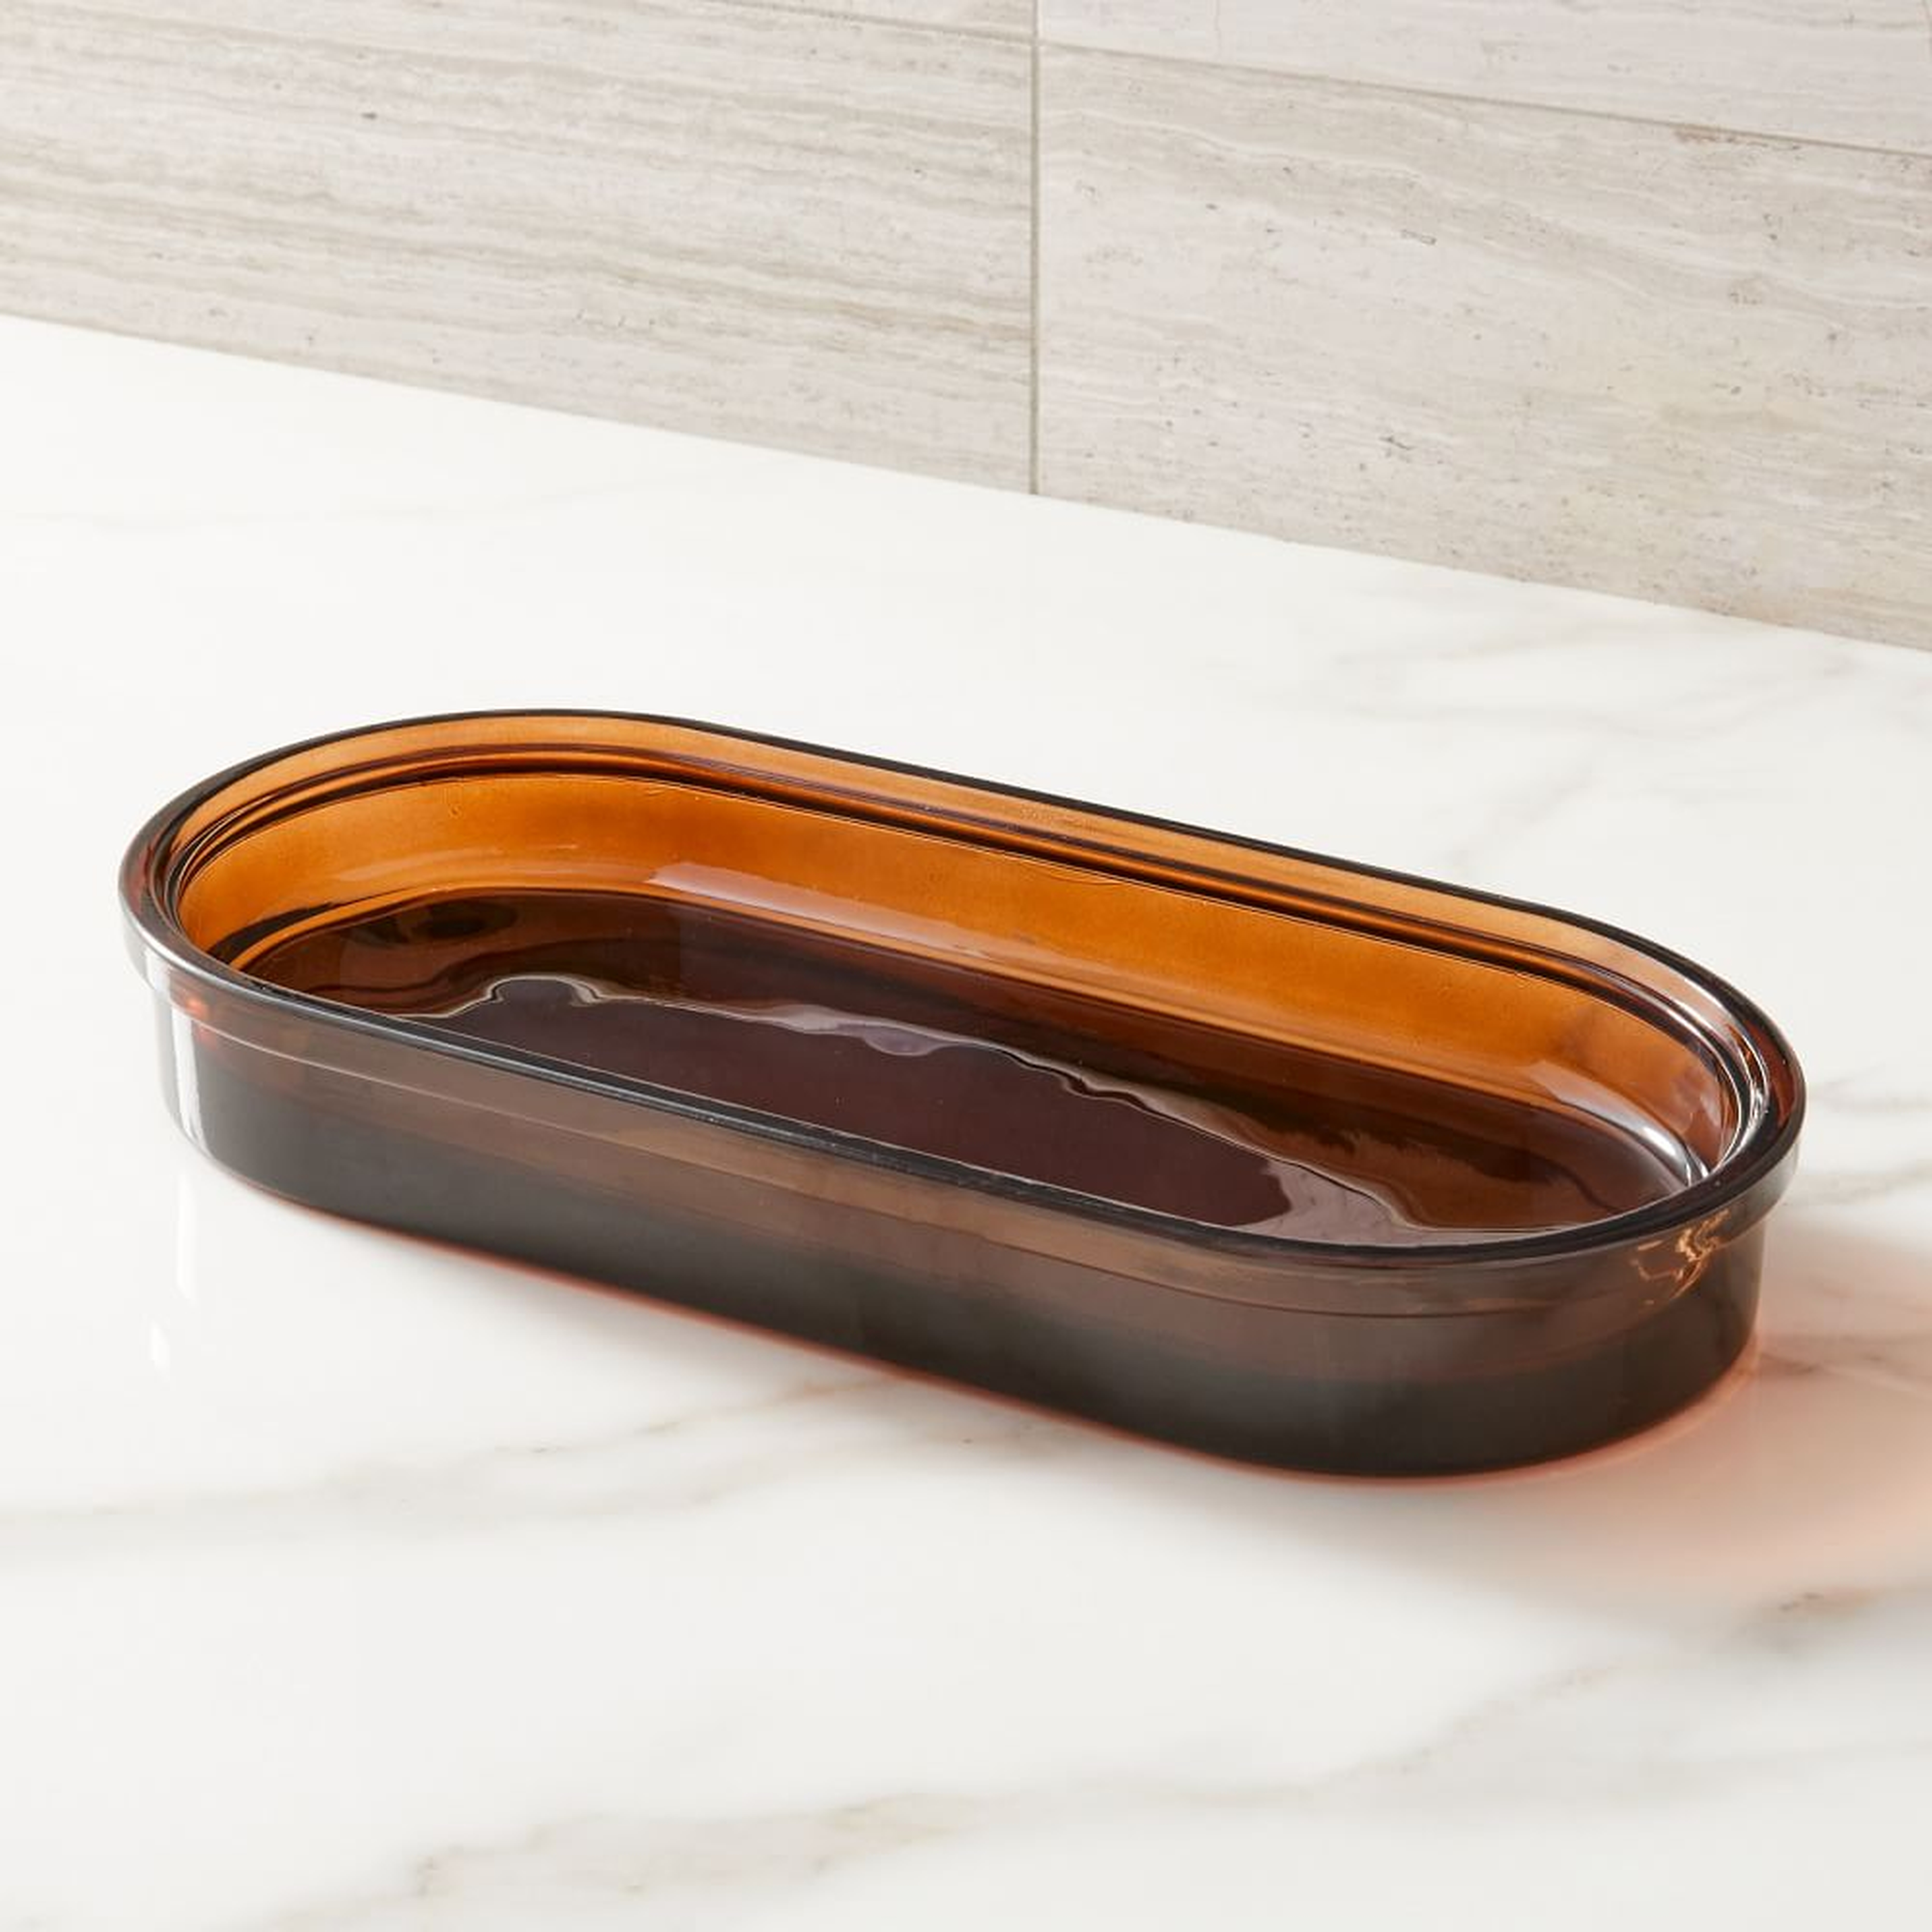 Apothecary Glass Bath Accessories, Amber, Tray - West Elm